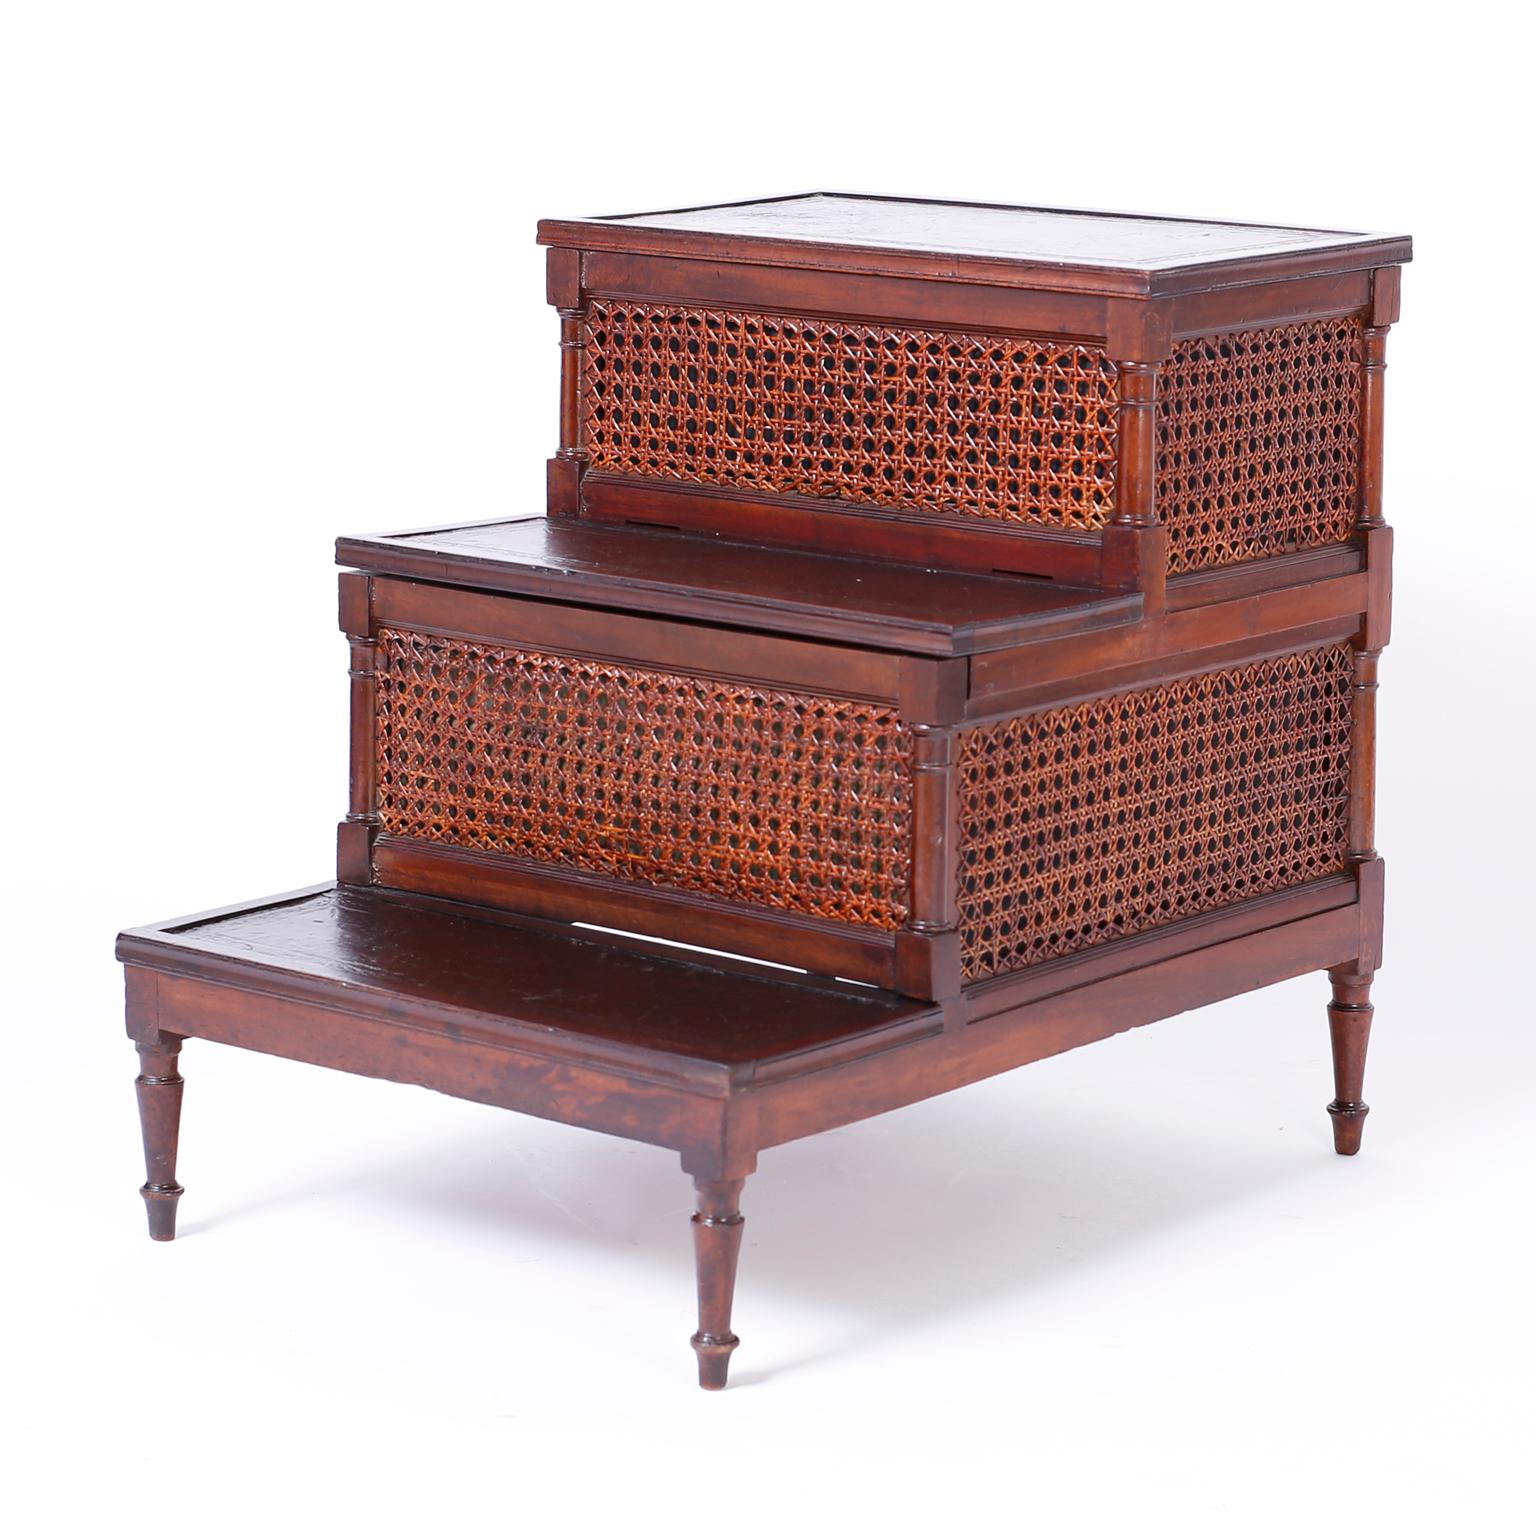 English mahogany library stairs retaining its original tooled brown leather steps, hand caned panels, elegant turned legs, and surprising hidden storage.